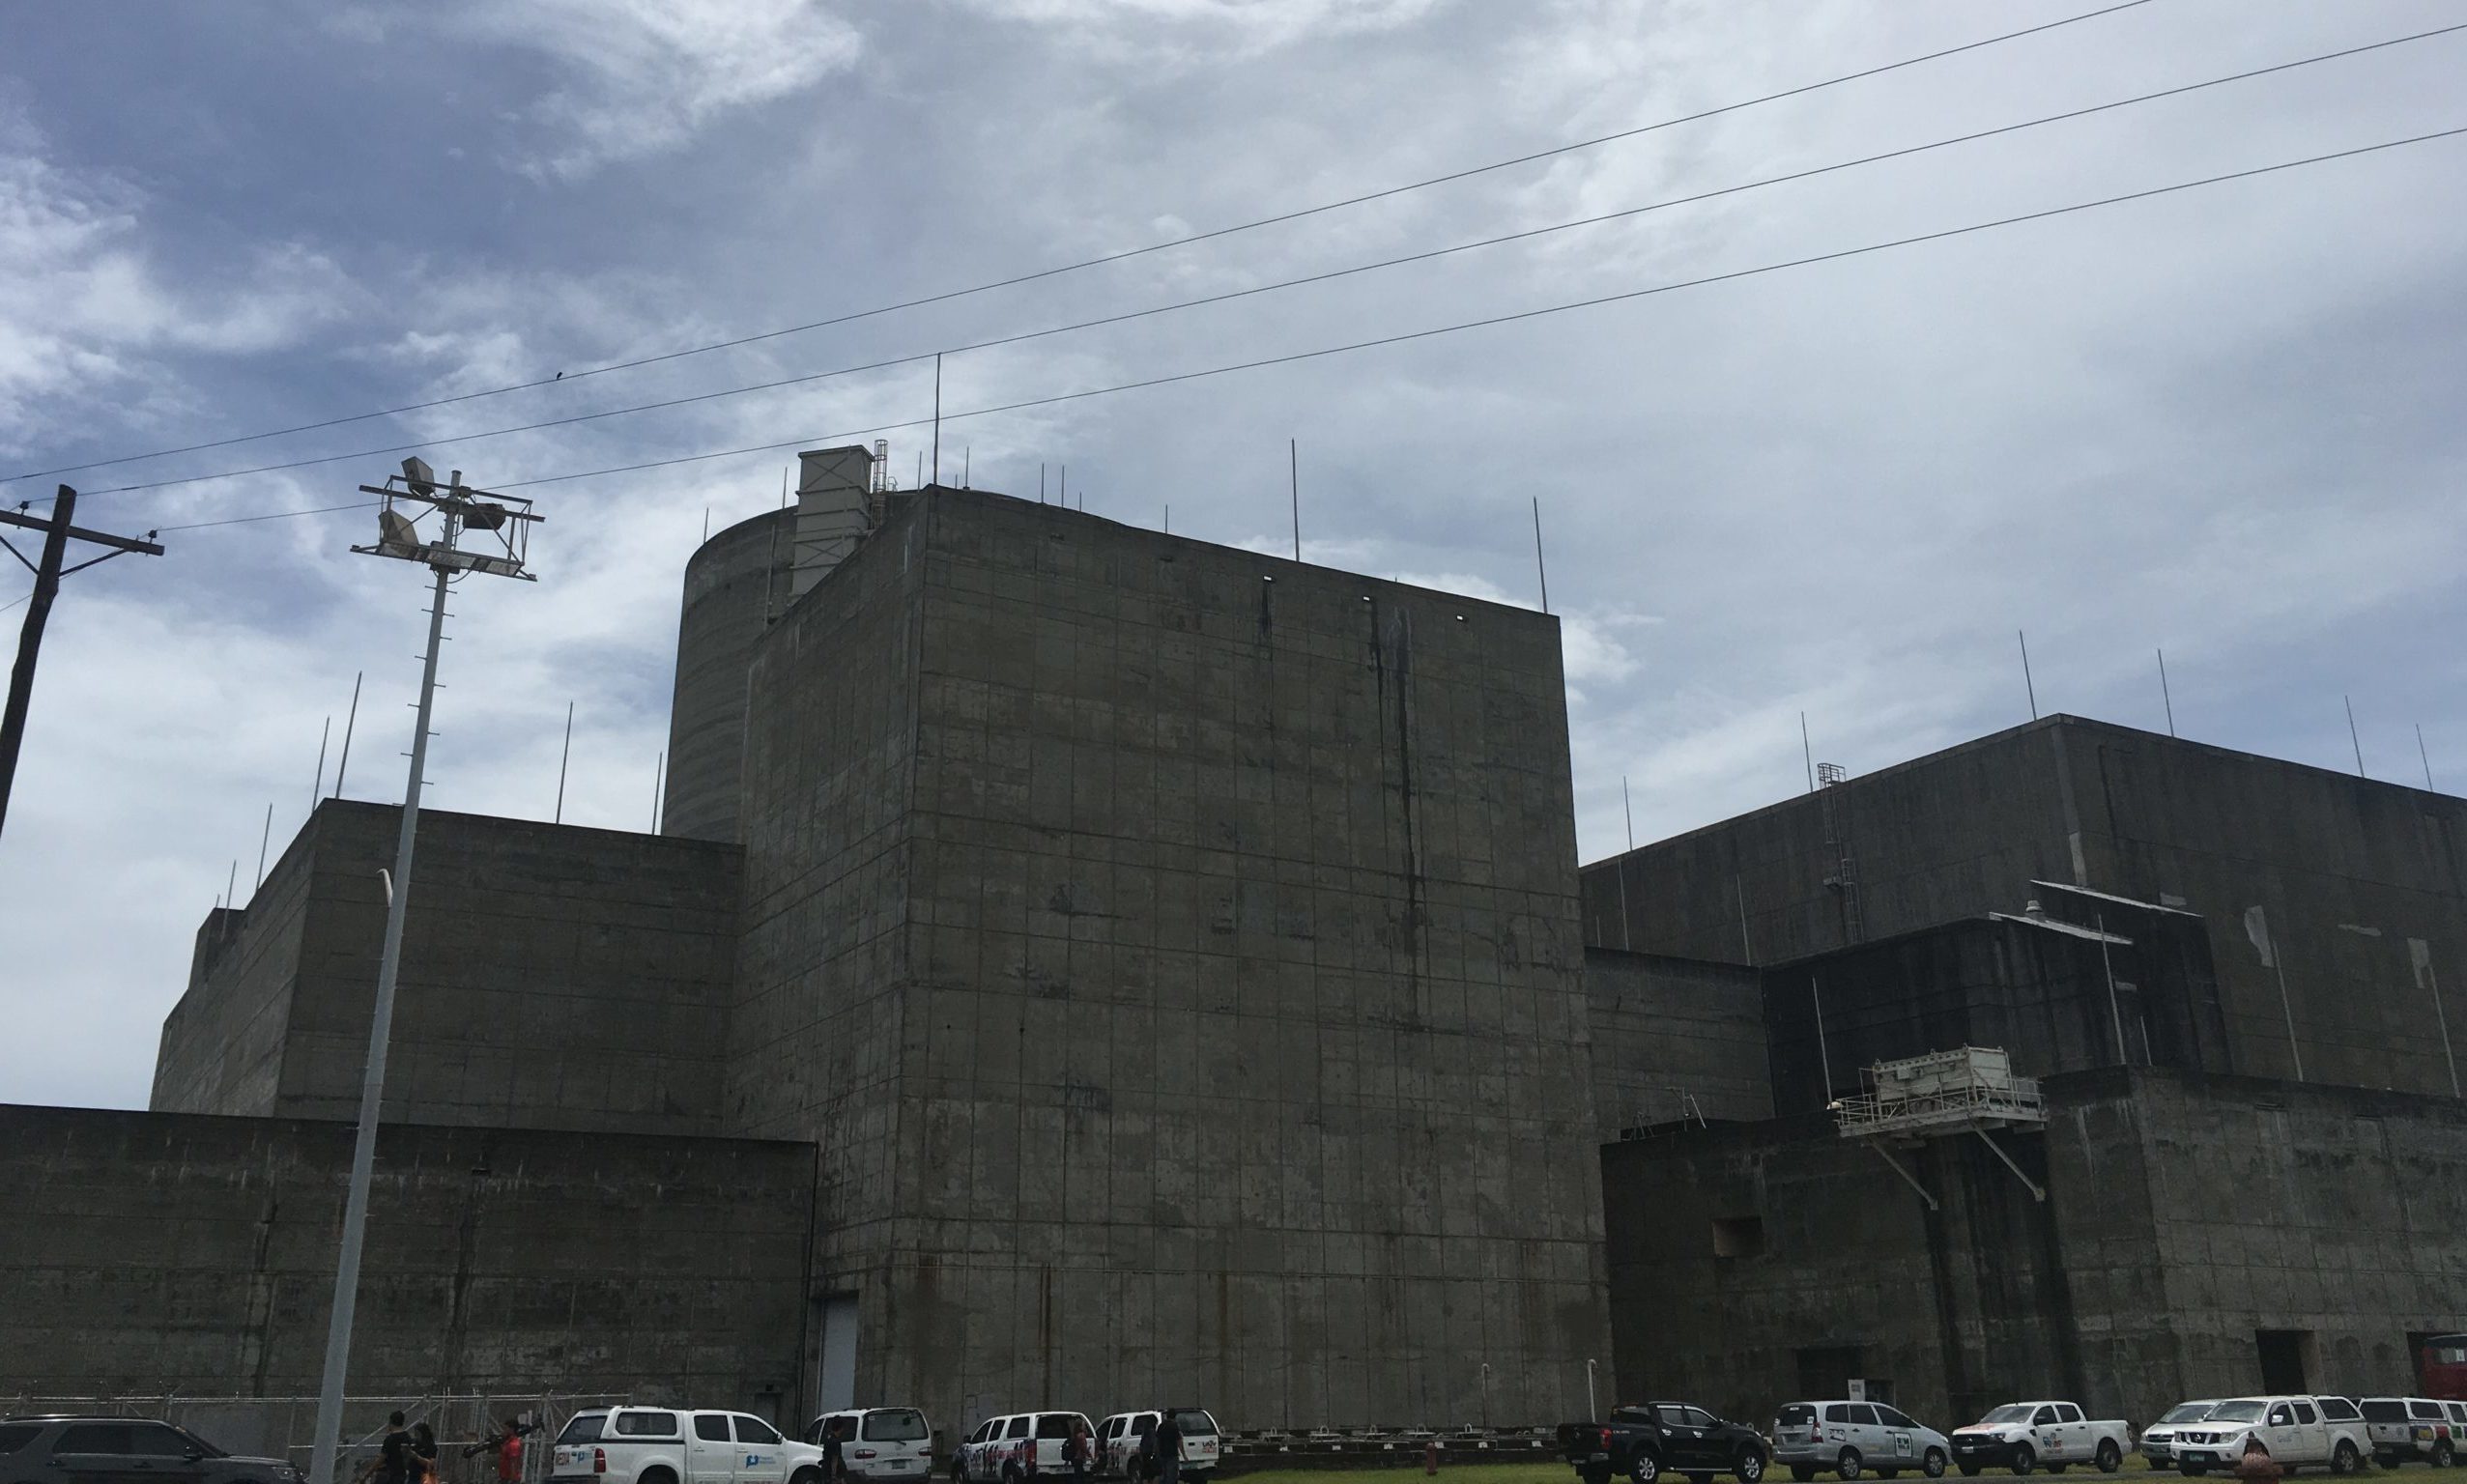 The Bataan Nuclear Power Plant in Morong town is situated at a 357-hectare government reservation.